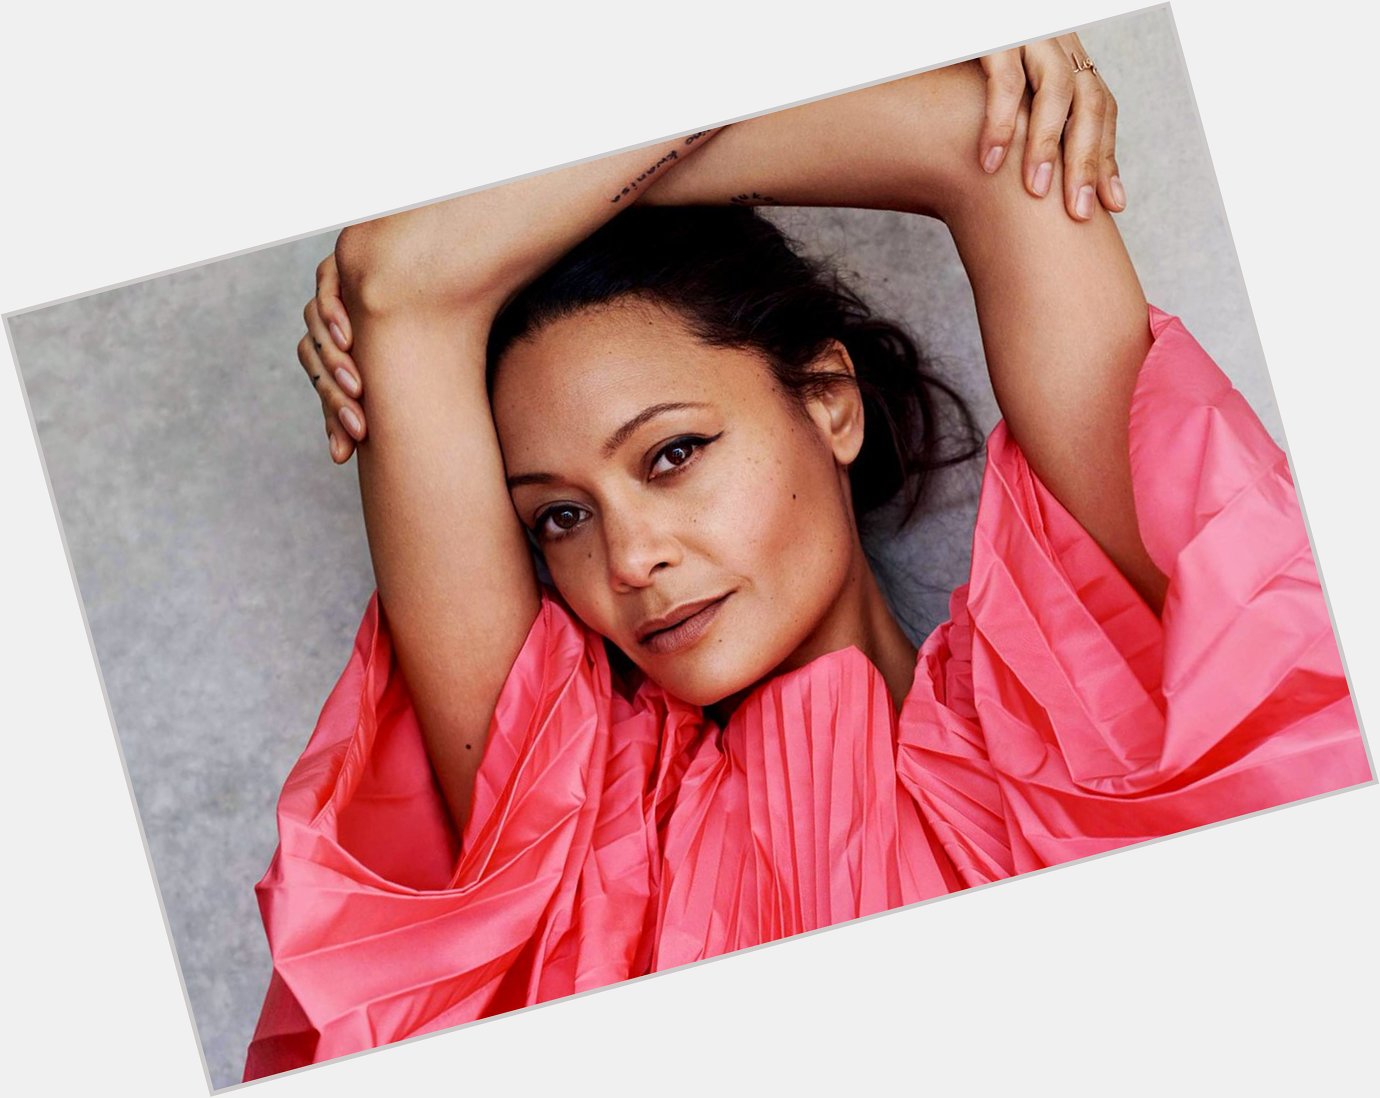 Happy birthday to this incredible woman, Thandie Newton. You are an inspiration. I am so proud to be your fan  